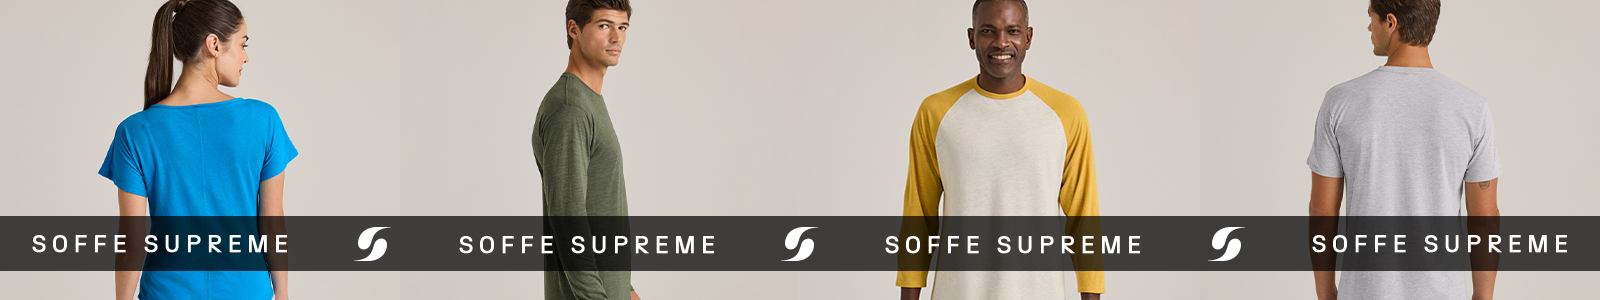 Soffe Supreme Collection